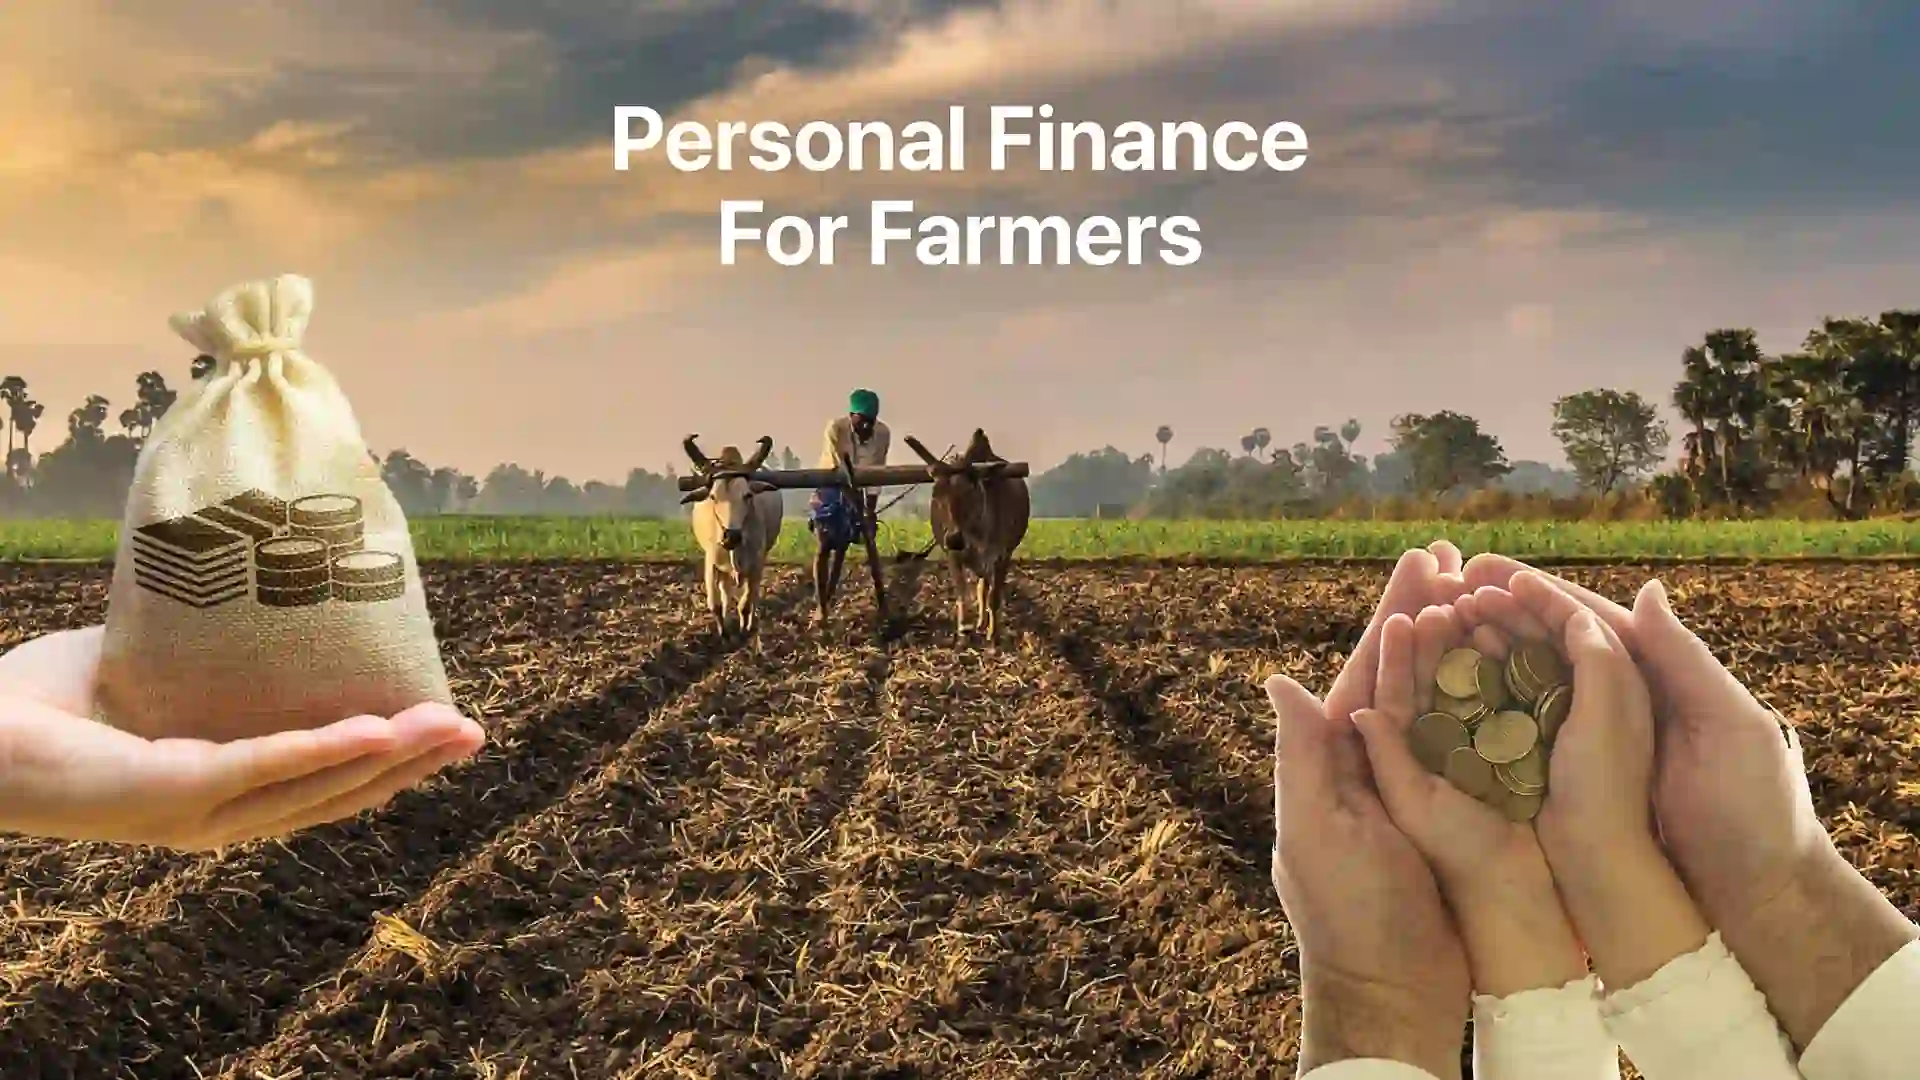 Course Trailer: A guide to Personal Finance for Farmers. Watch to know more.